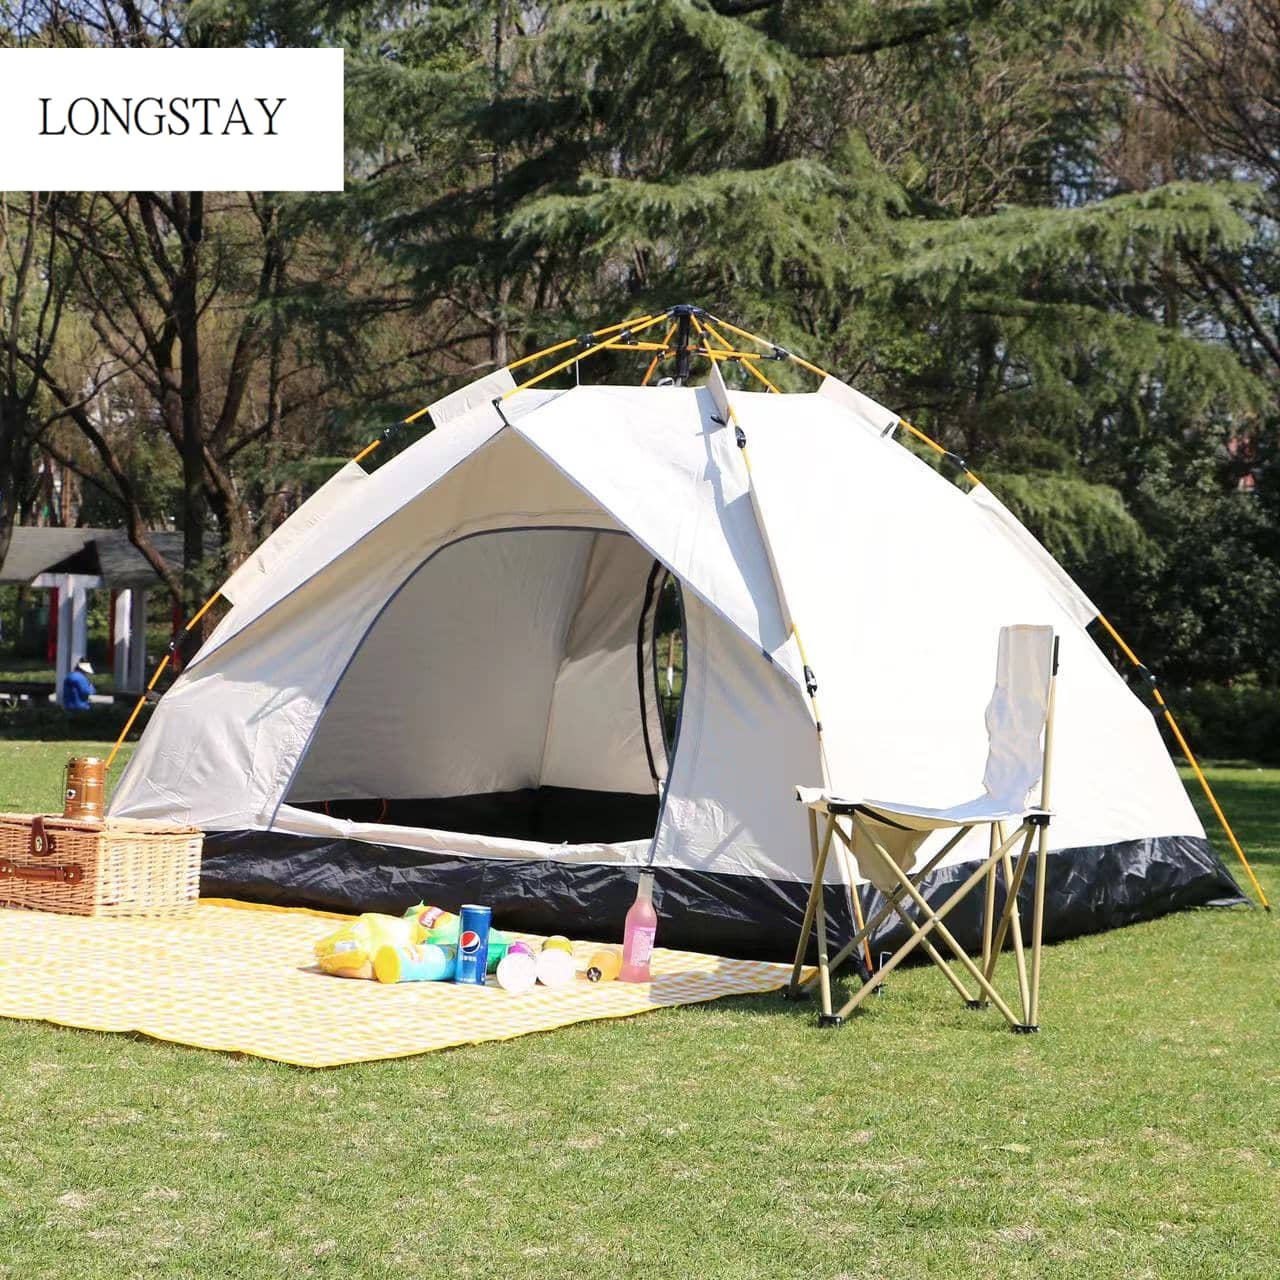 Four-Sided Tent - Your Gateway to Outdoor Comfort and Convenience!